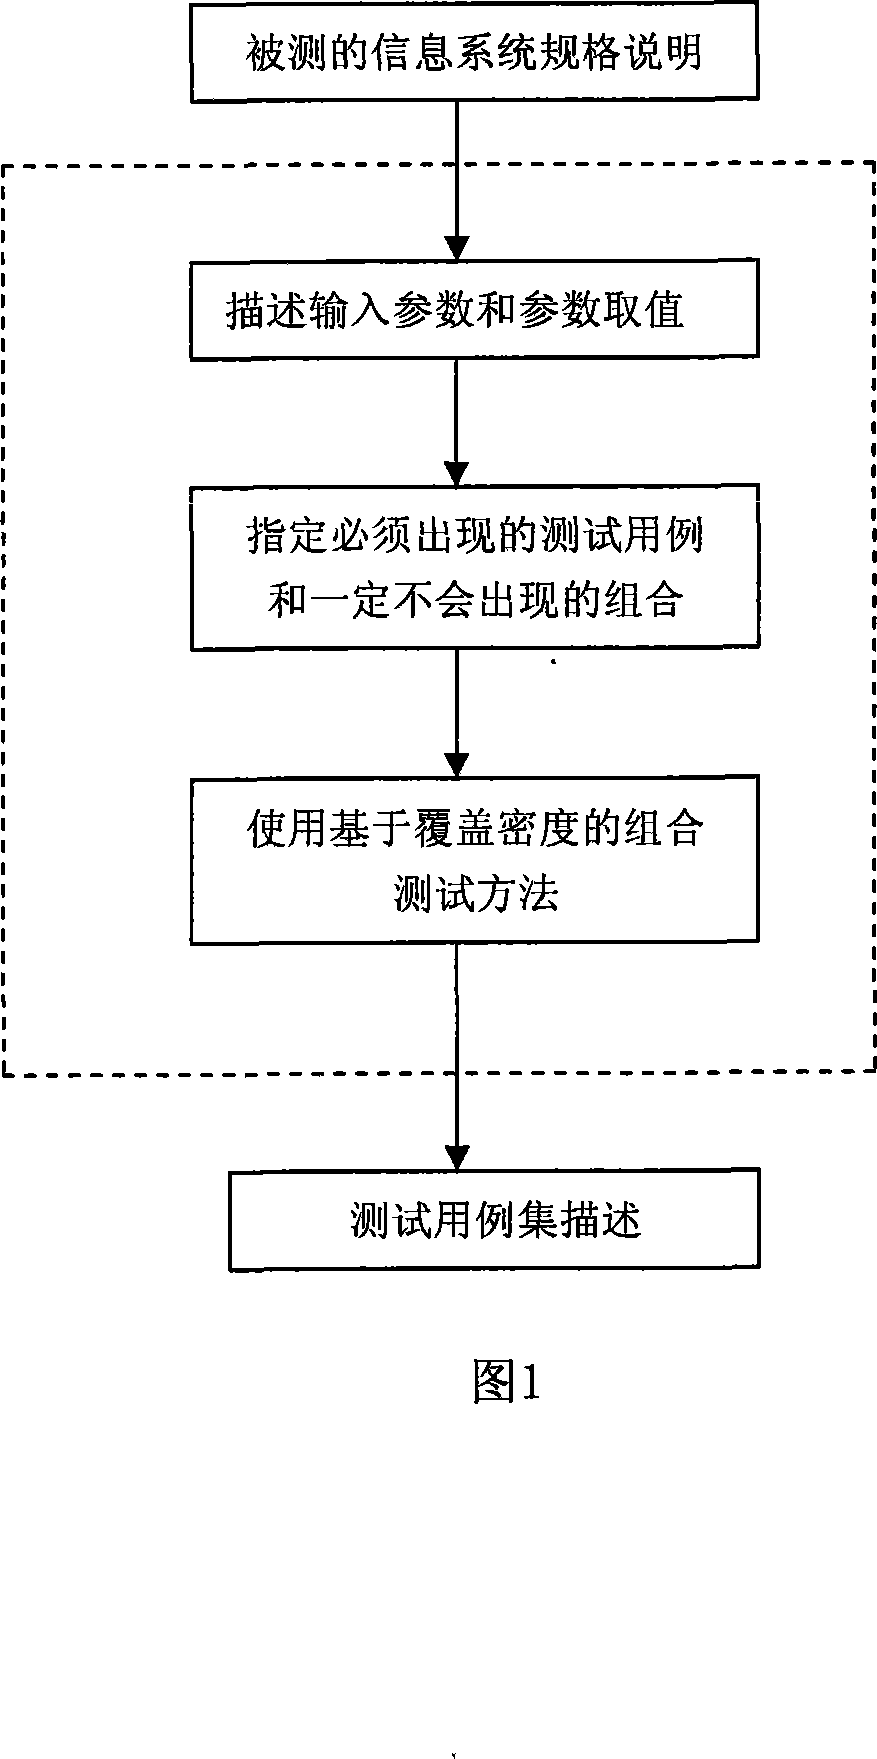 Information systems test combination generation method based on coverage density